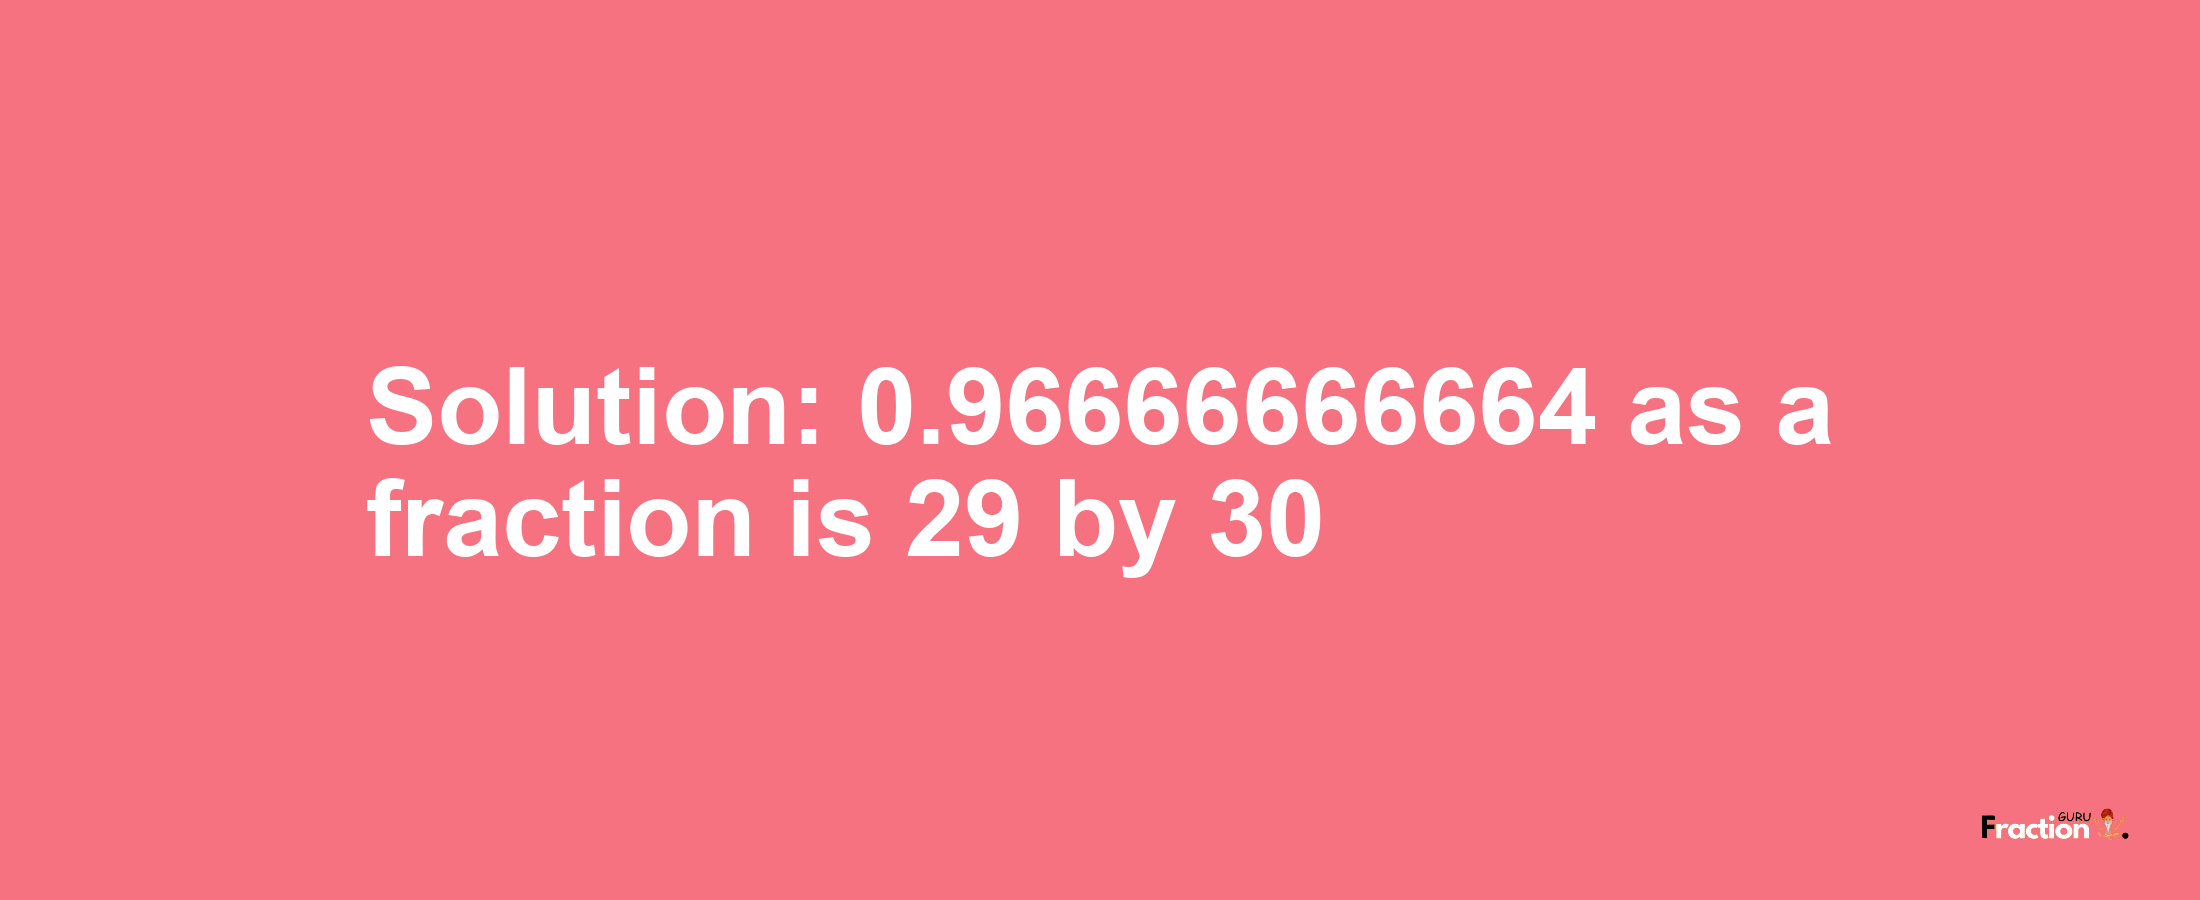 Solution:0.96666666664 as a fraction is 29/30